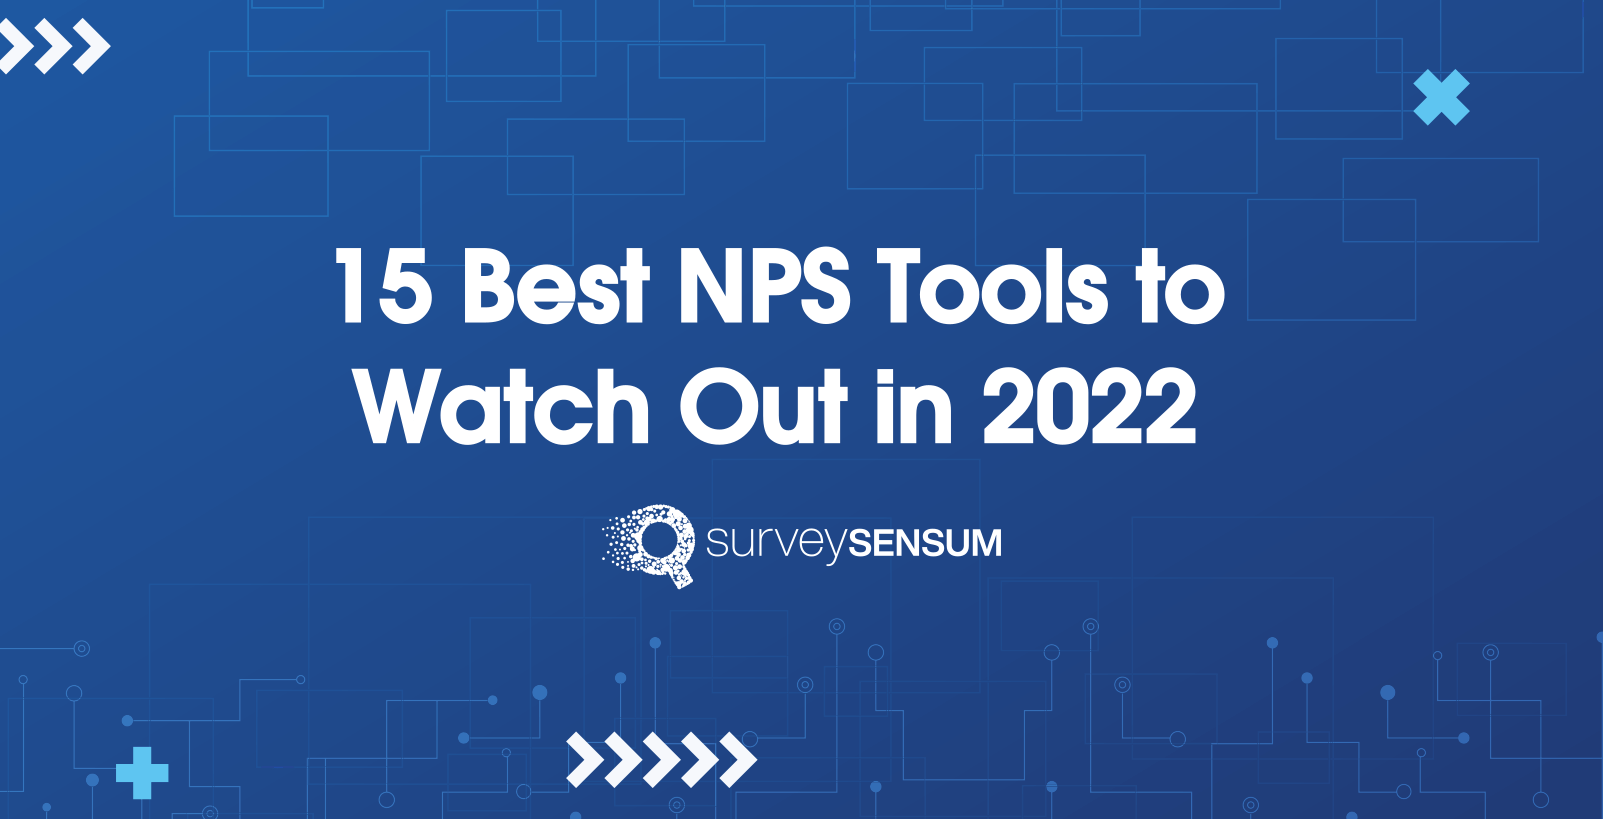 15 Best NPS Tools to Watch Out in 2022